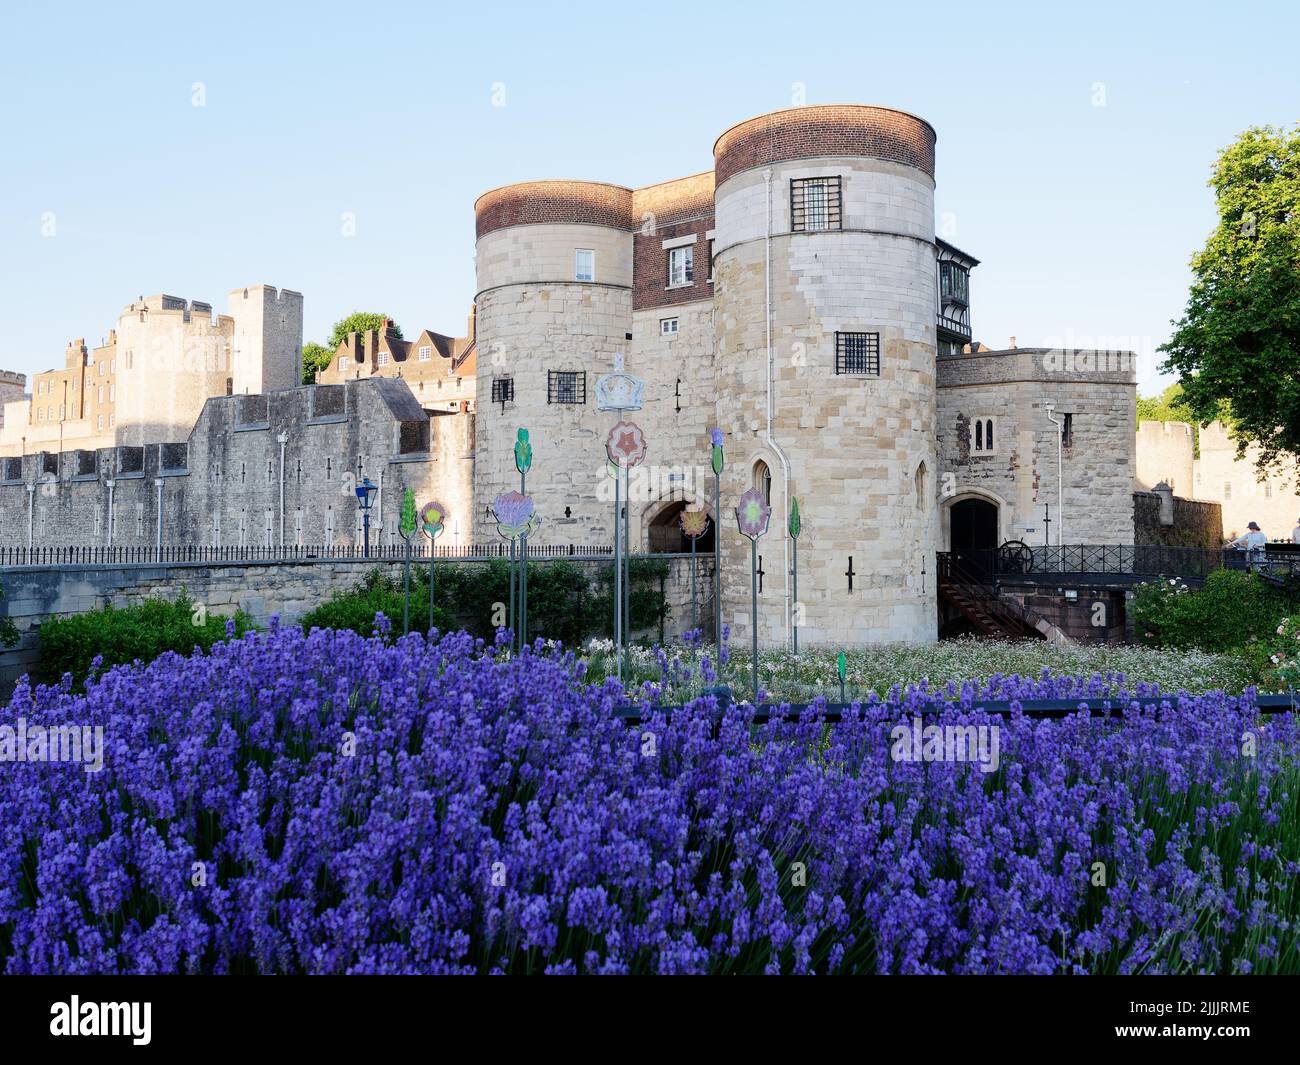 London, Greater London, England, June 22 2022: Lavender blooming in front of the Tower Of London. Stock Photo